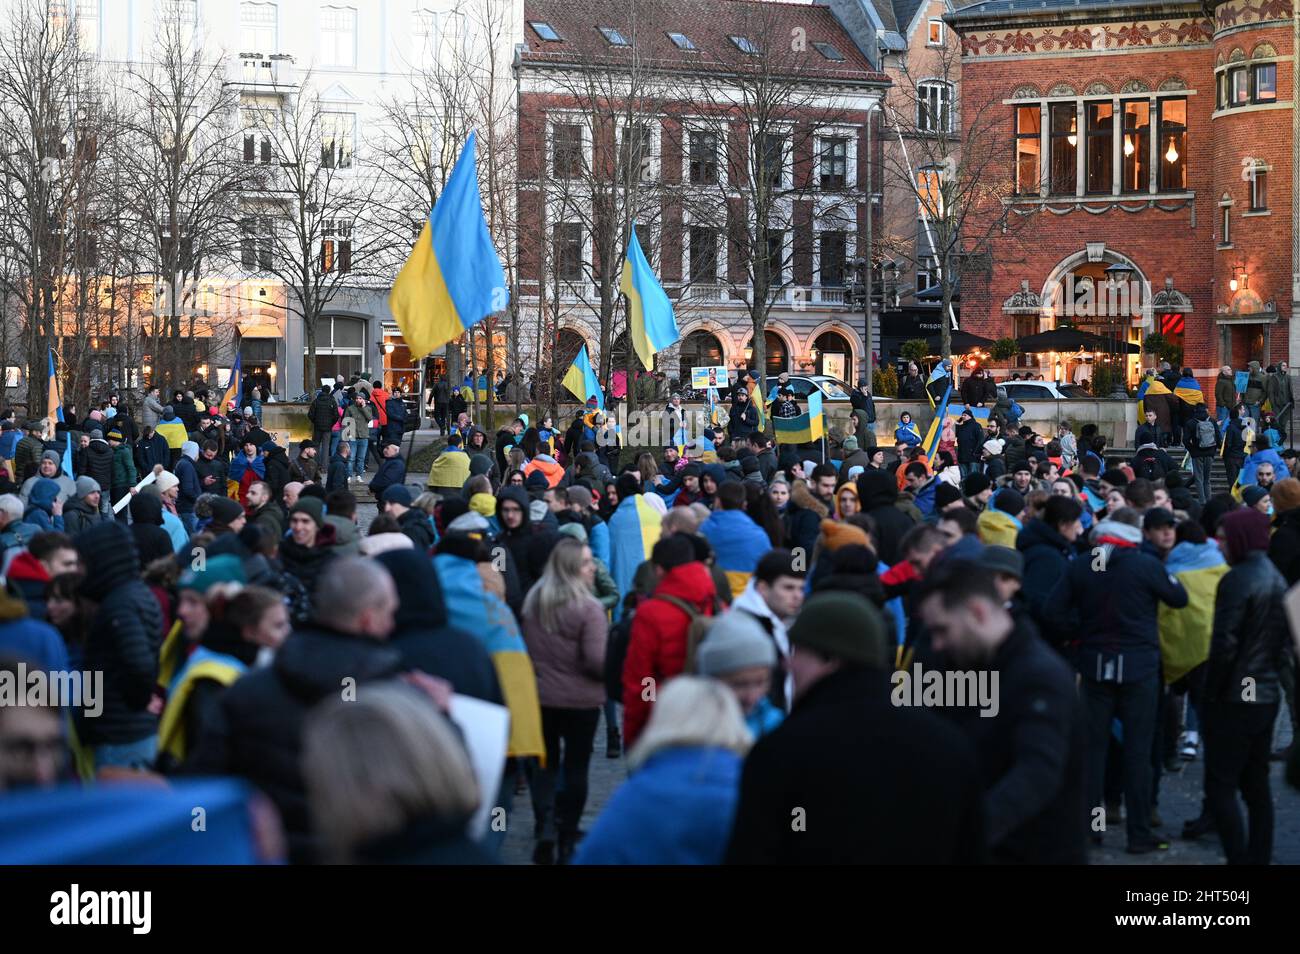 Crowd of people protesting against the Russian invasion of Ukraine: Anti war protests demonstration in Aarhus, Denmark on 26 February 2022. Showing pe Stock Photo